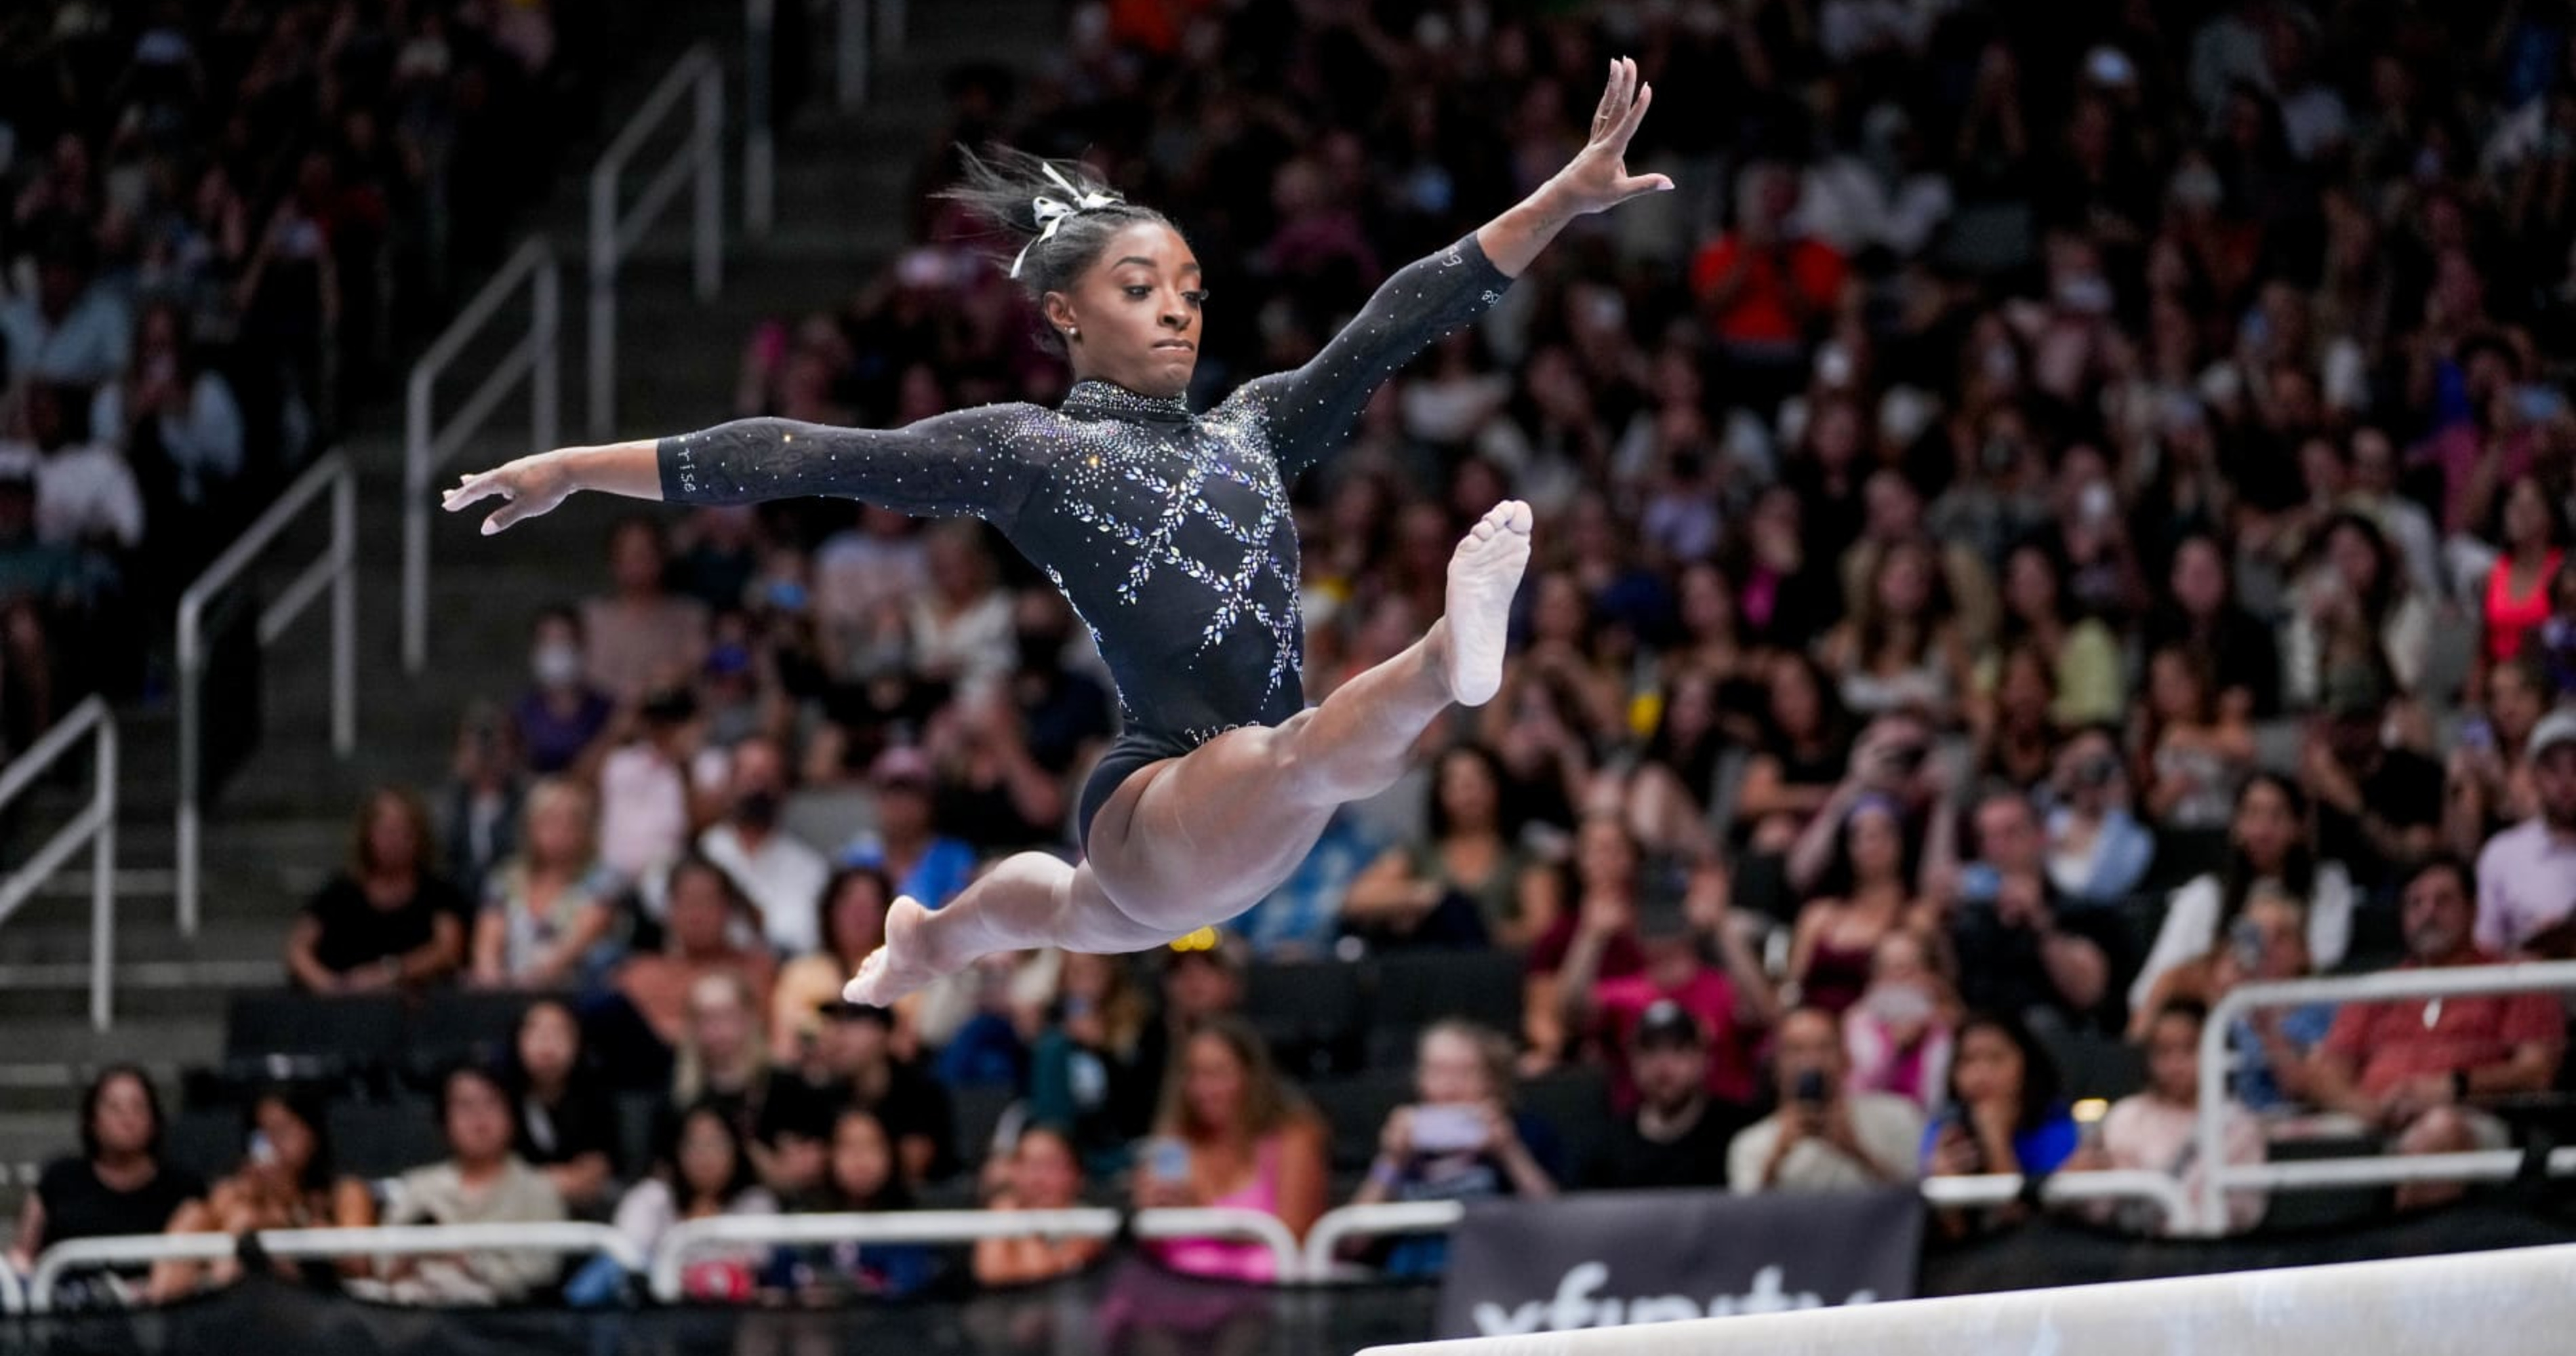 Biles to compete in sixth world championships